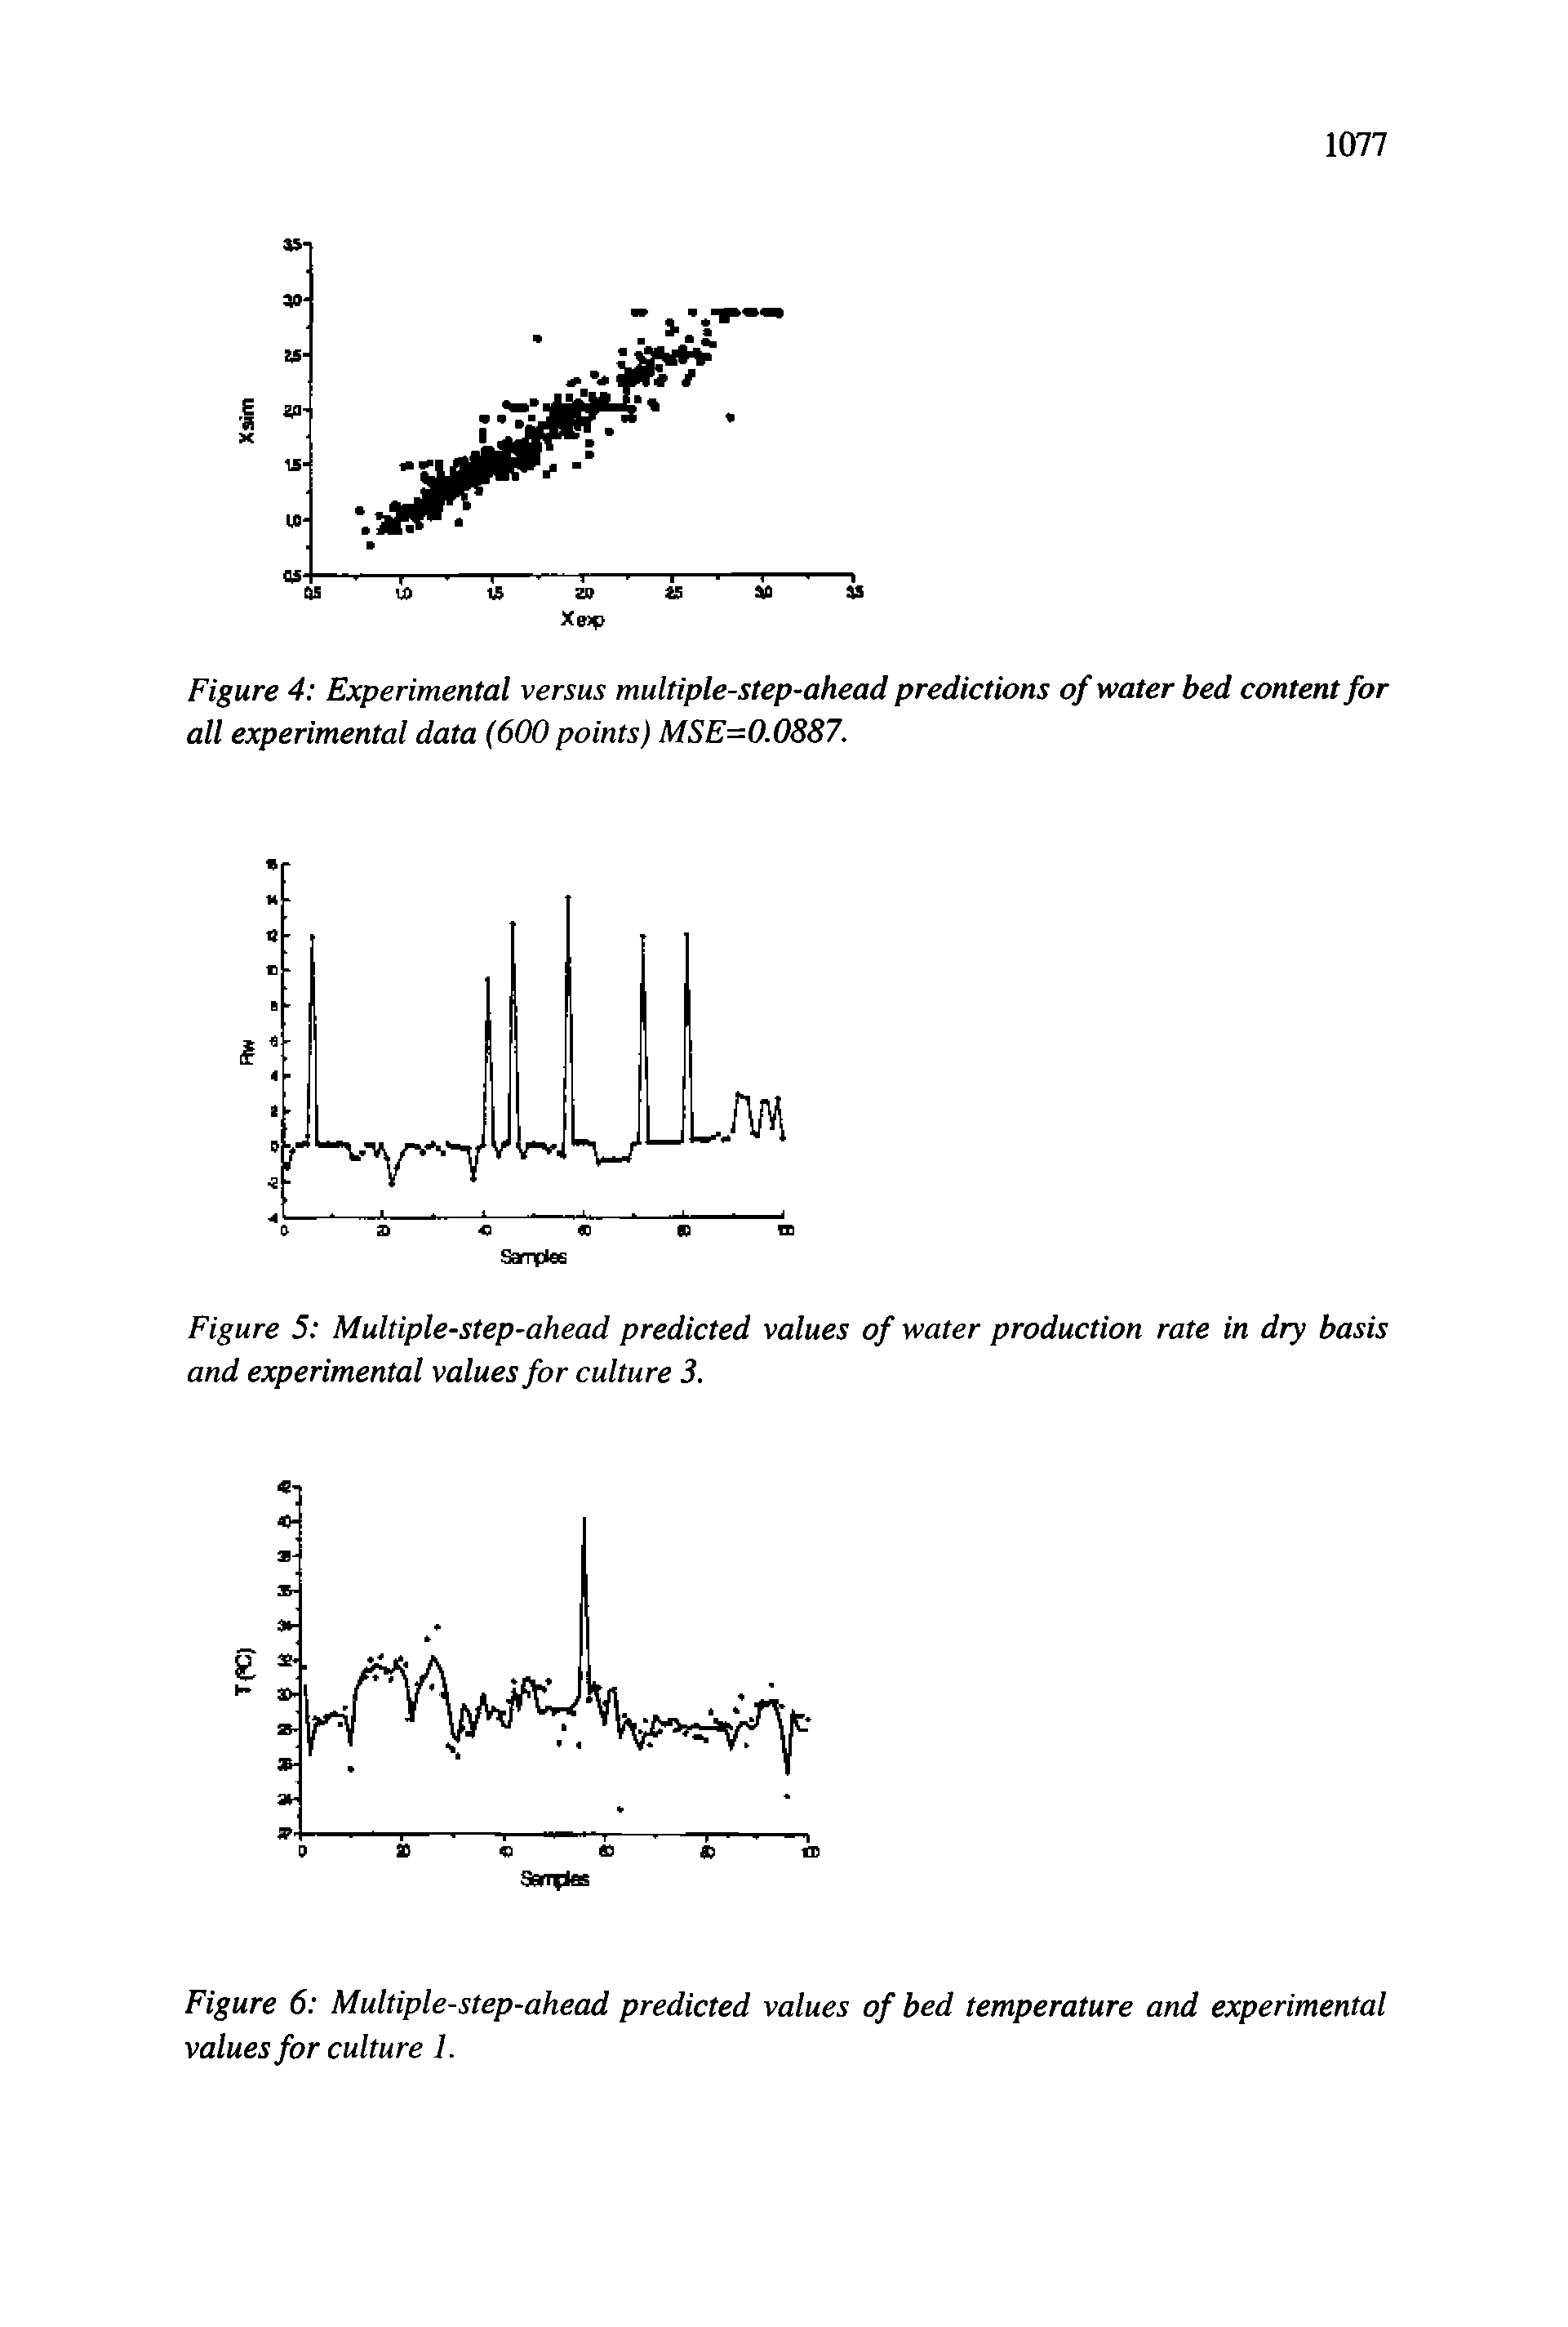 Figure 5 Multiple-step-ahead predicted values of water production rate in dry basis and experimental values for culture 3.